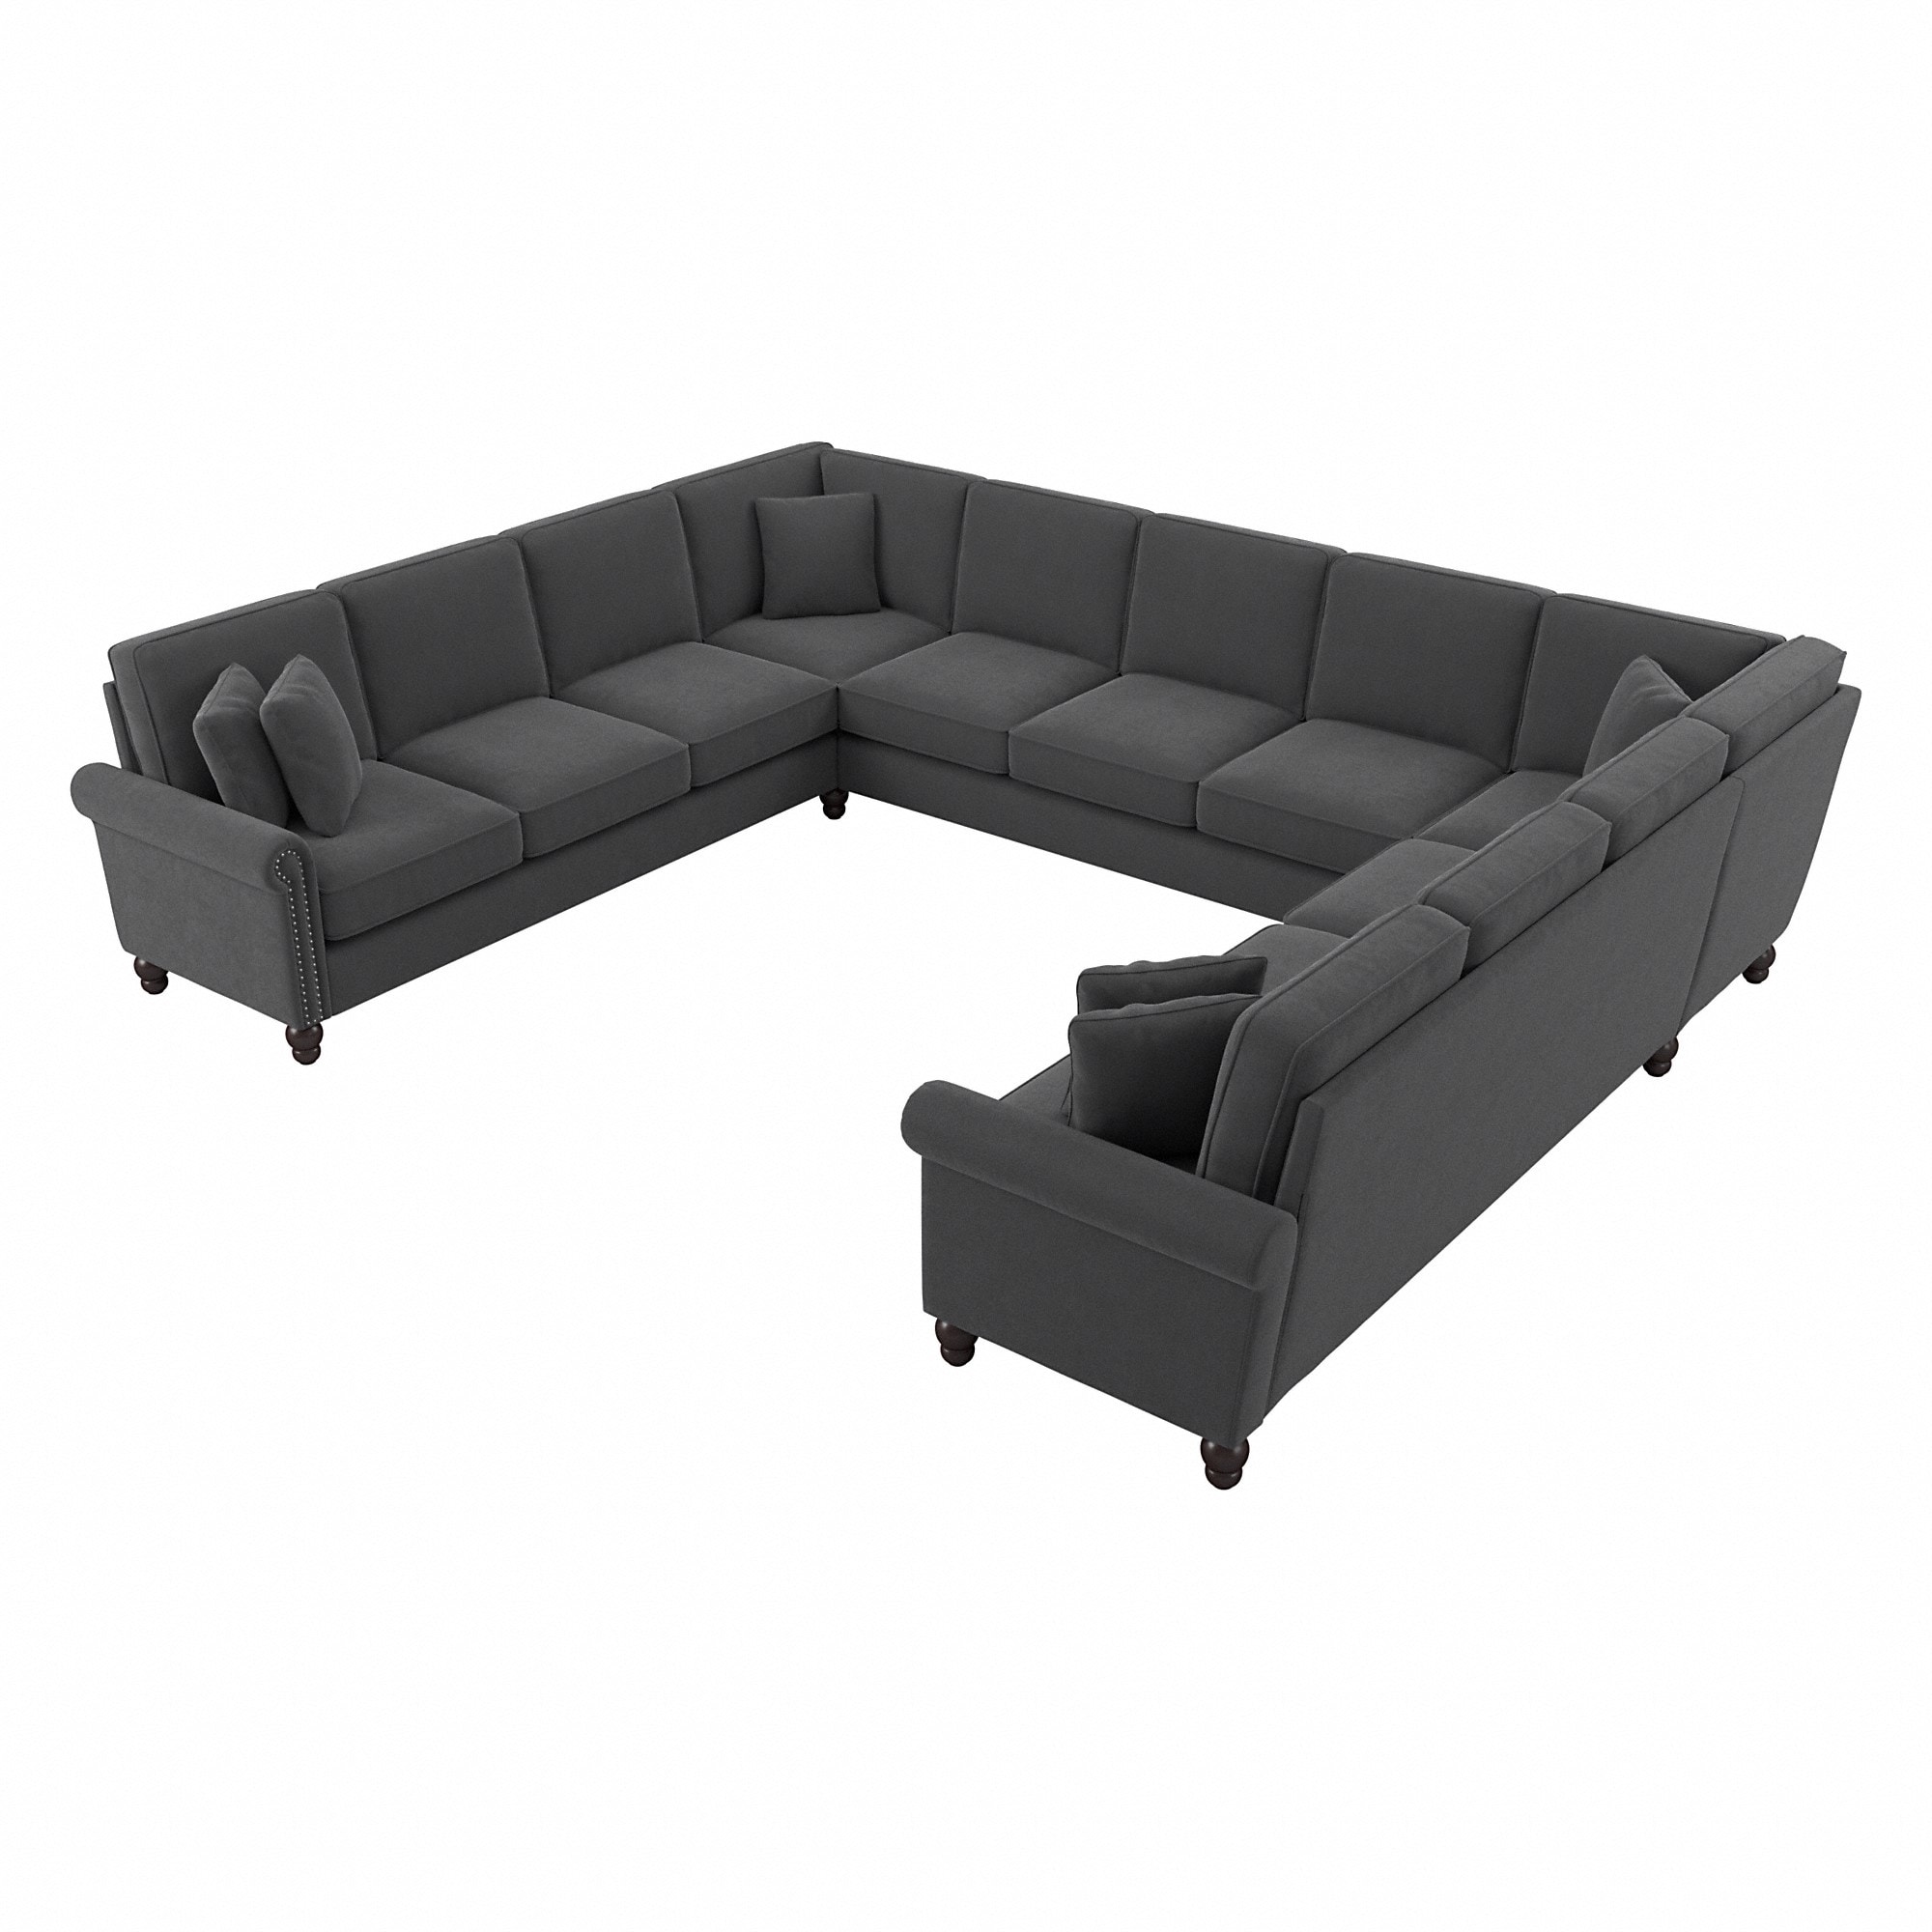 Bush Furniture Coventry 137W U Shaped Sectional Couch by